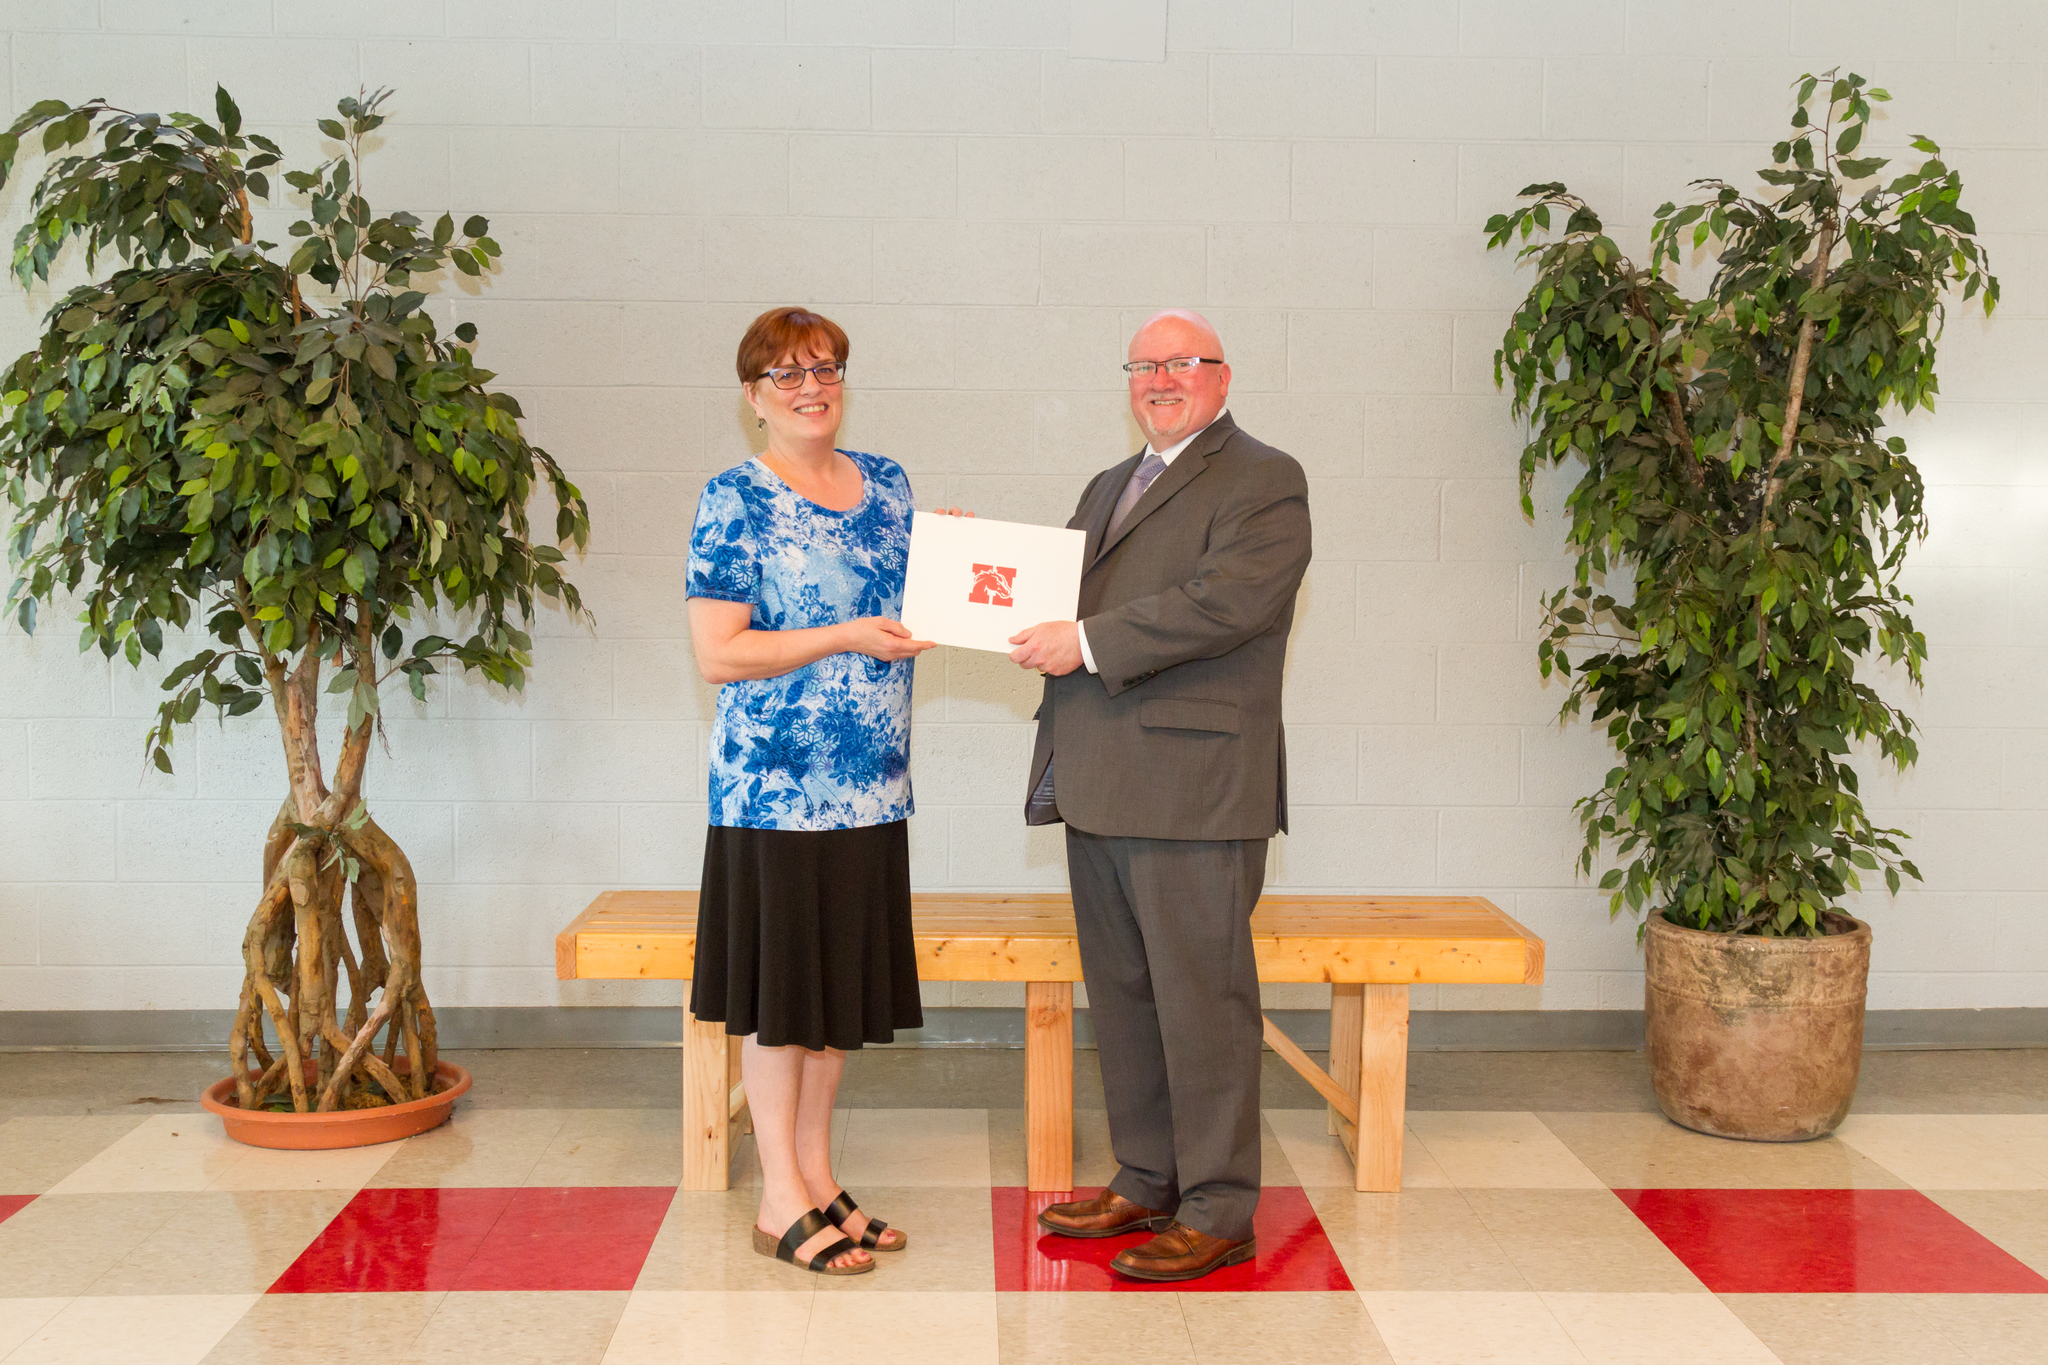 Mrs. Oldaugh and the Board President holding award